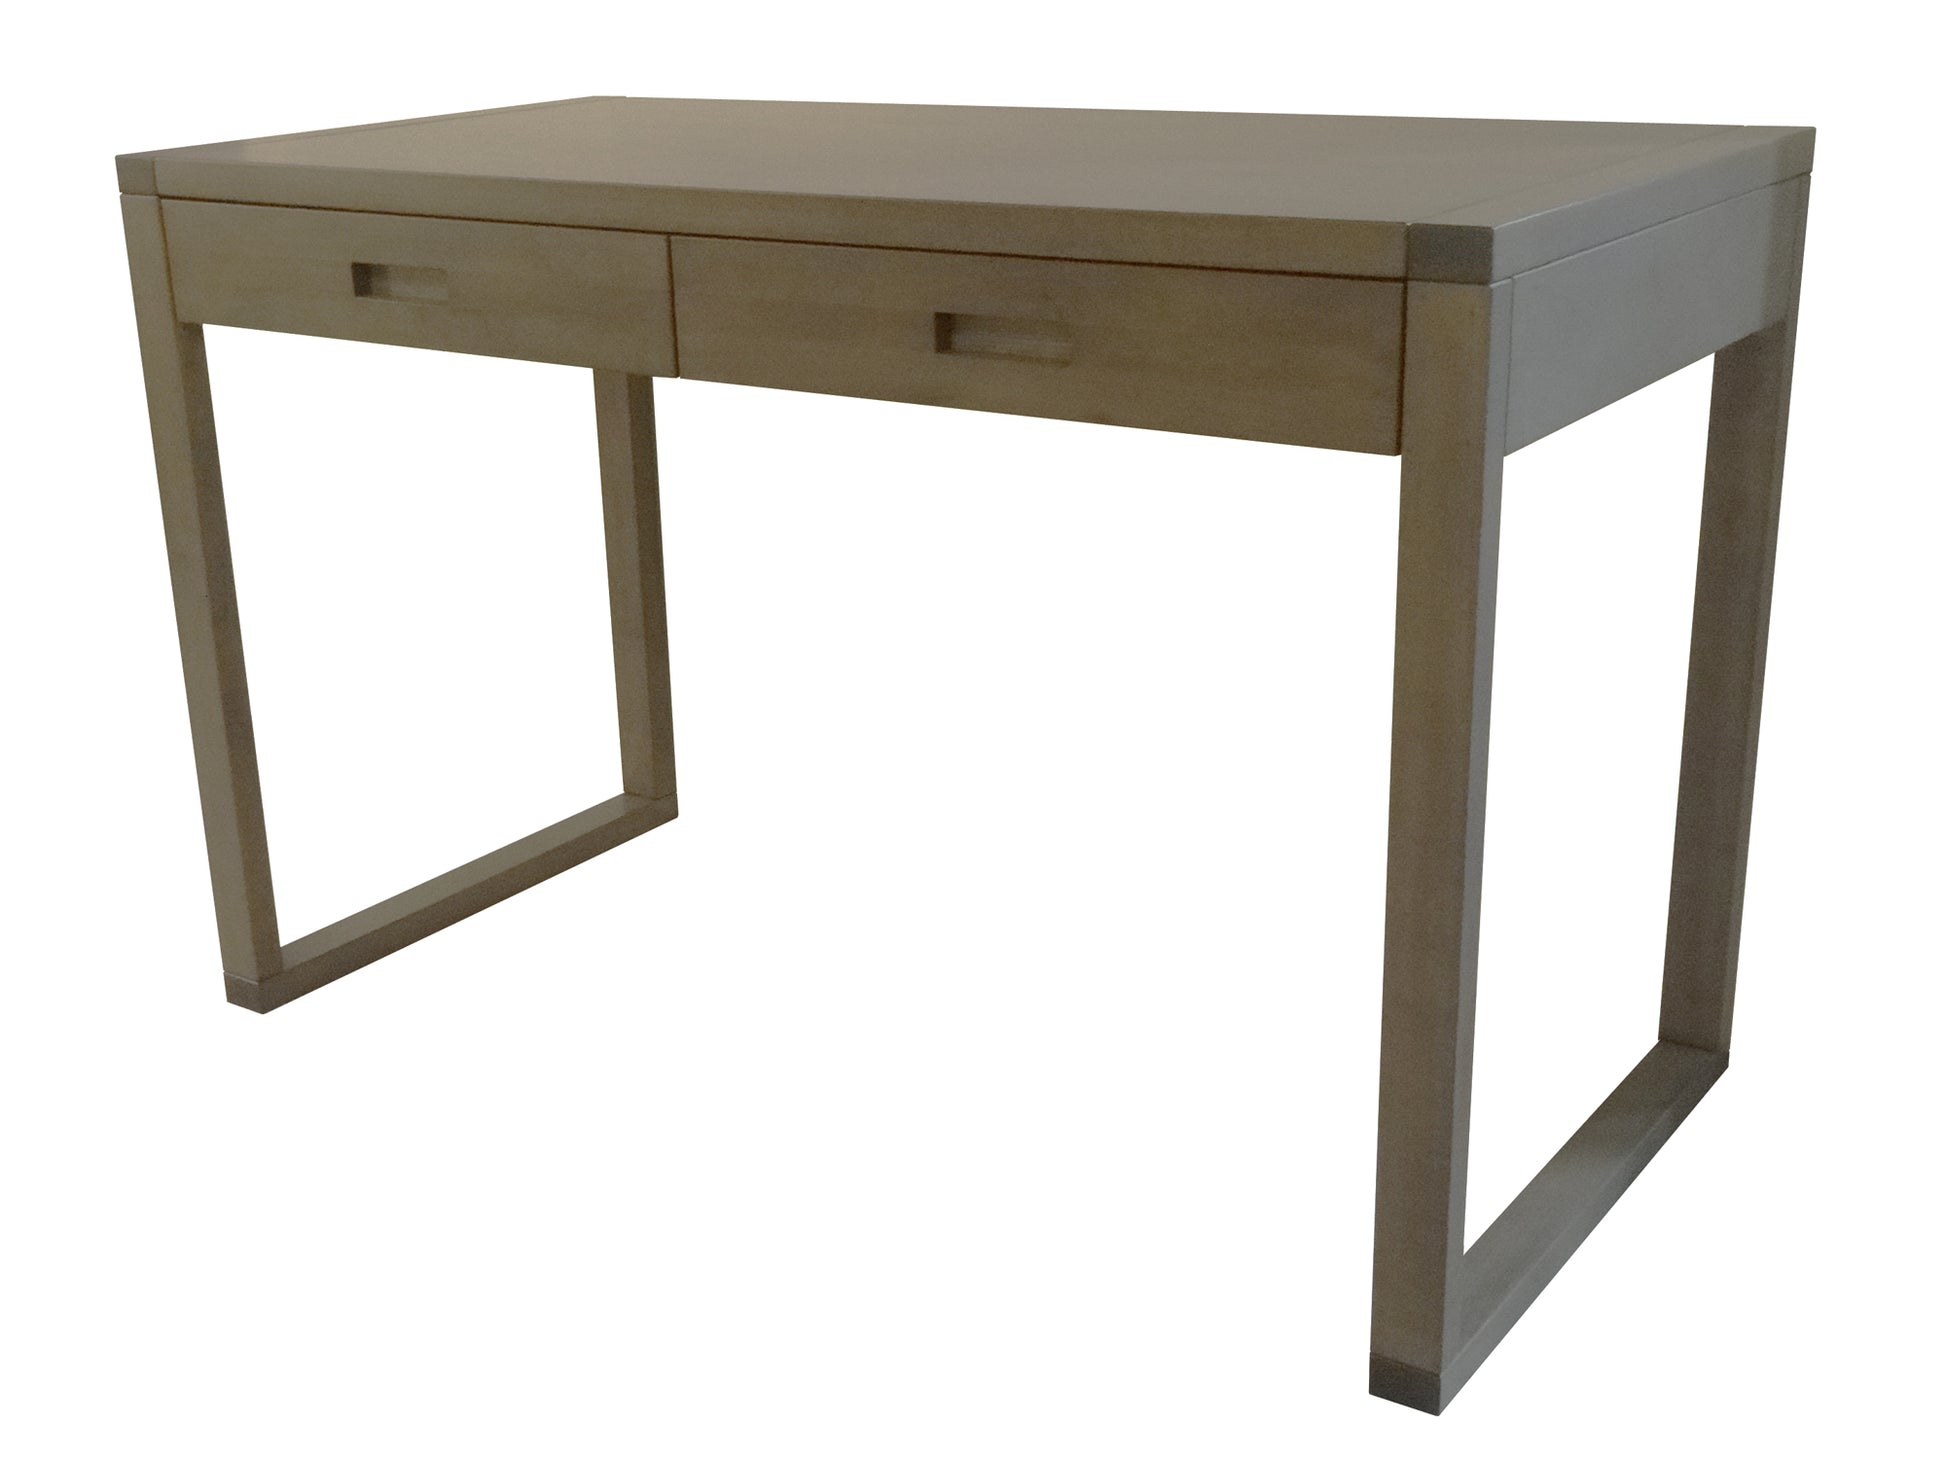 Tangent Writing Desk, built in solid wood, locally built, and part of our in-house design furniture collections.